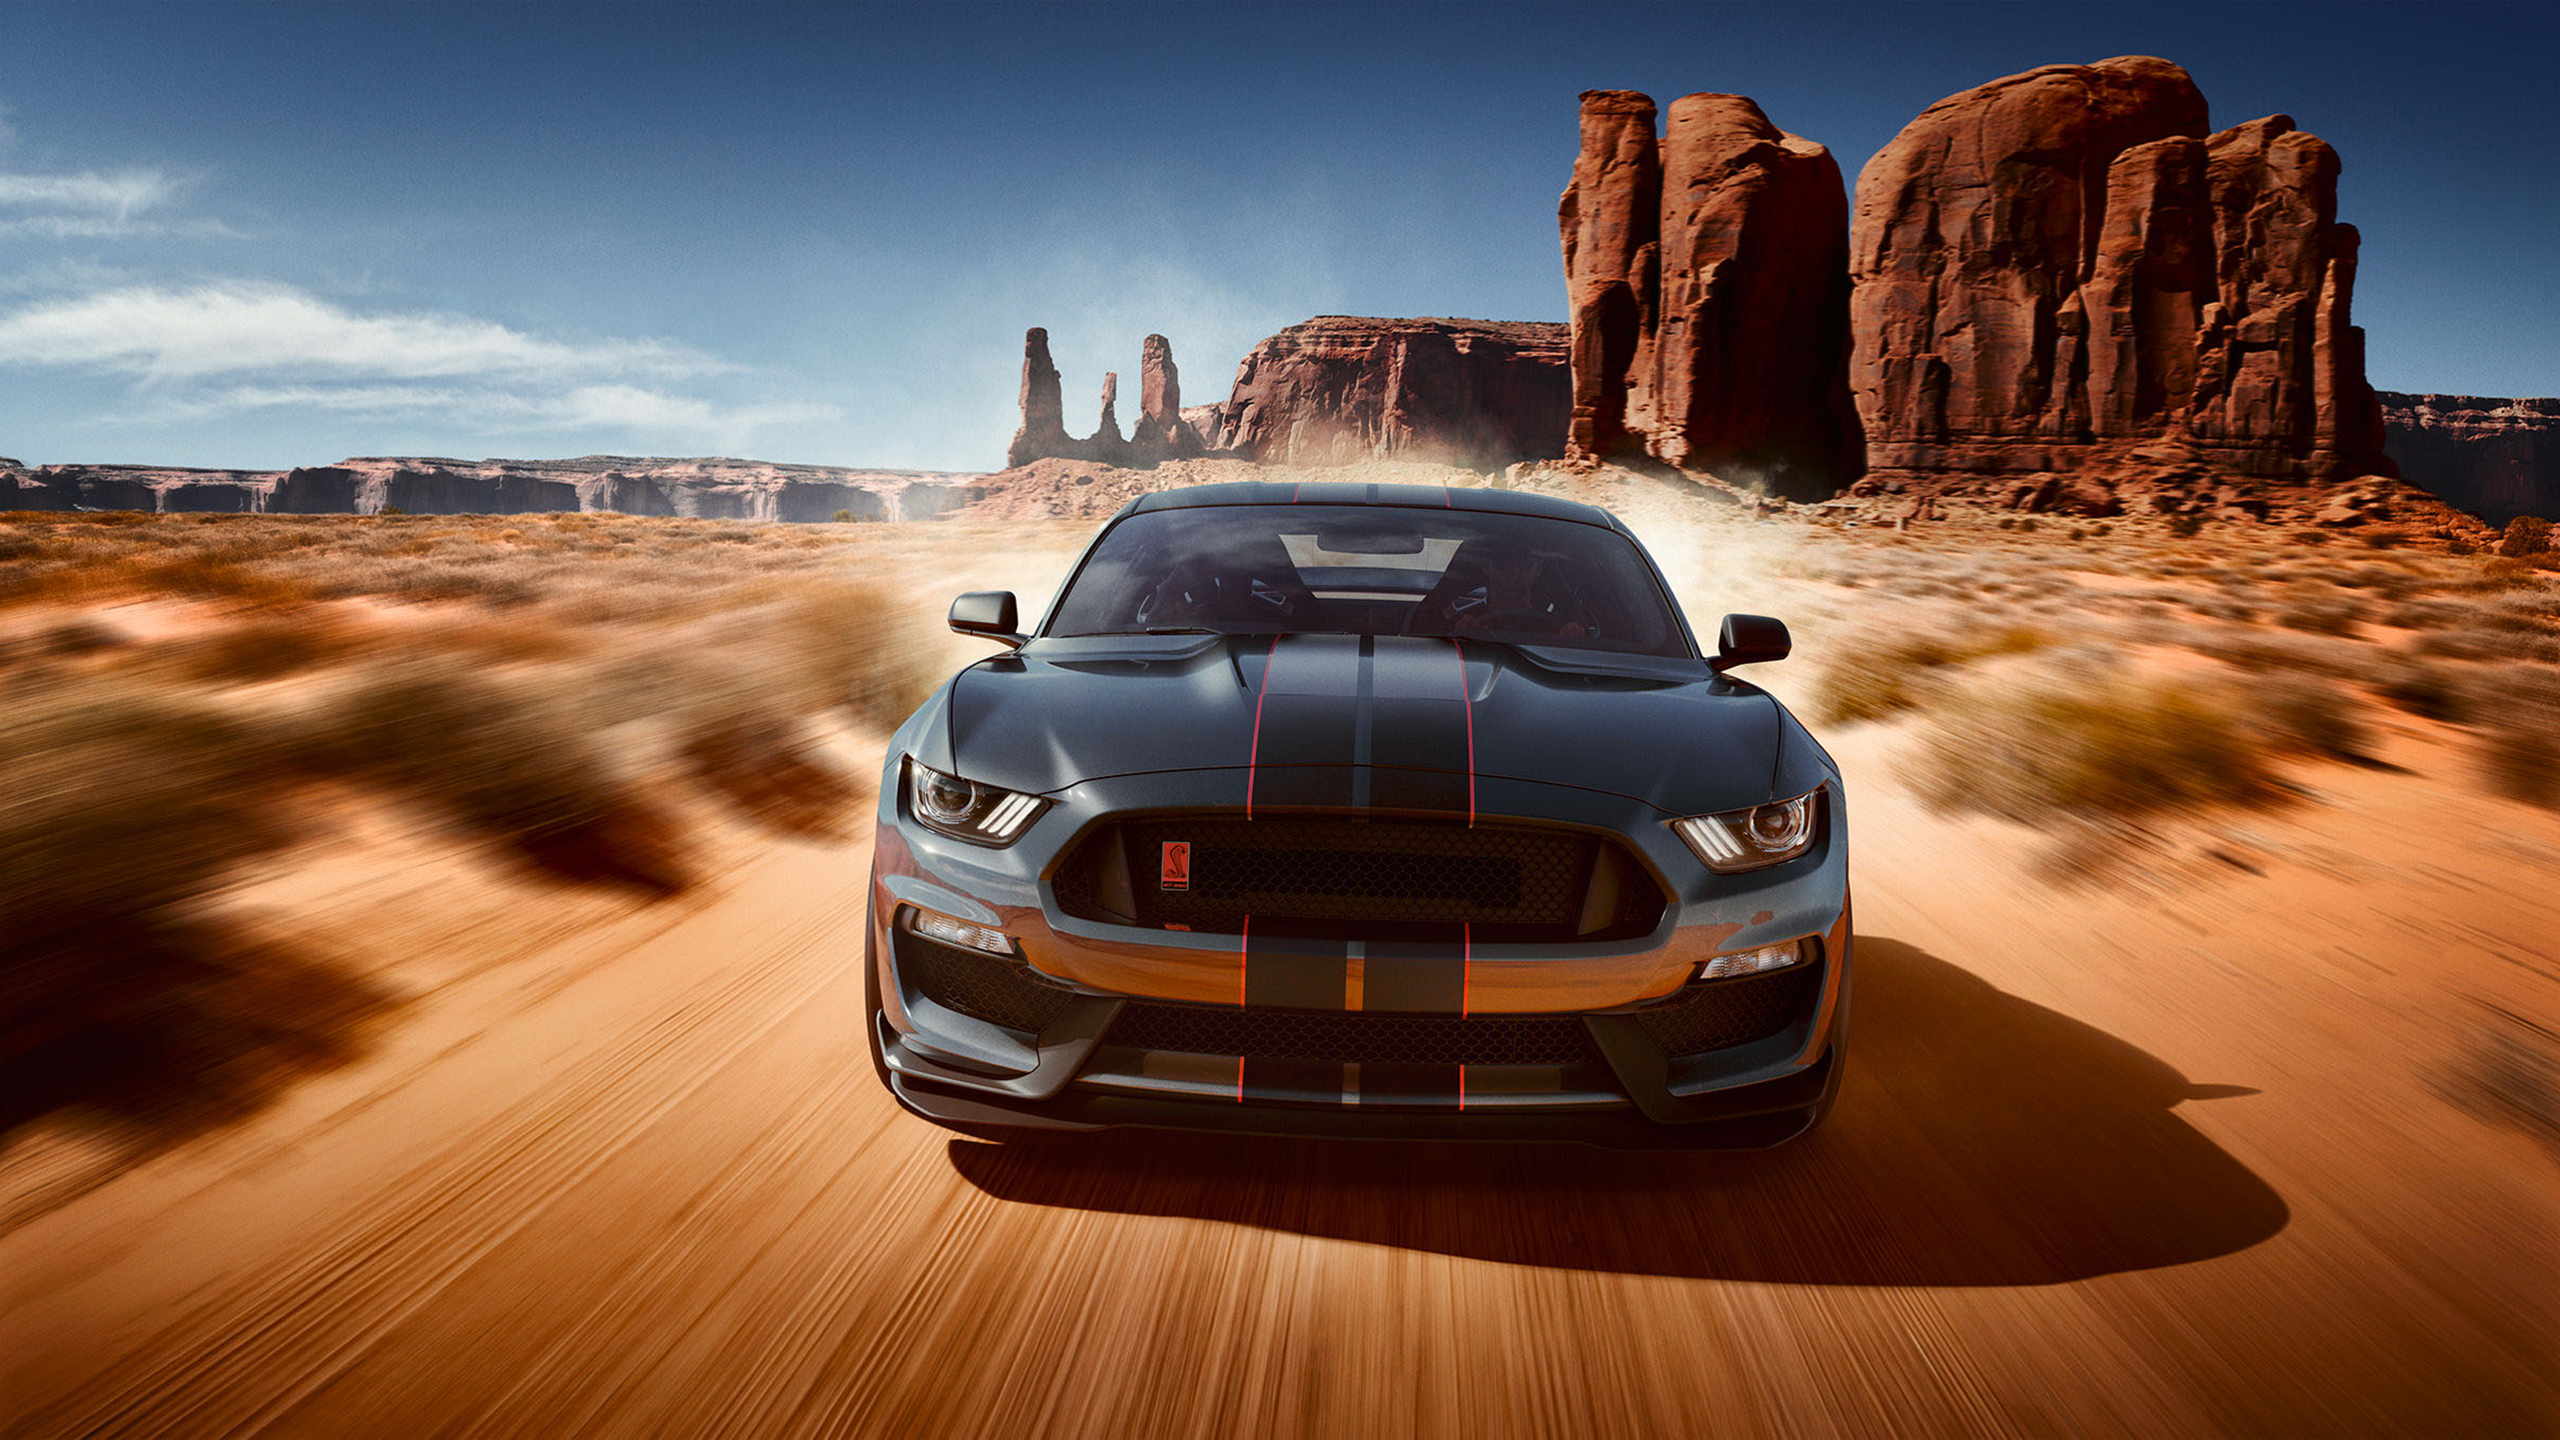 Ford Mustang Shelby Gt350 Wallpapers Mustang Gt350 2560x1440 Wallpaper Teahub Io